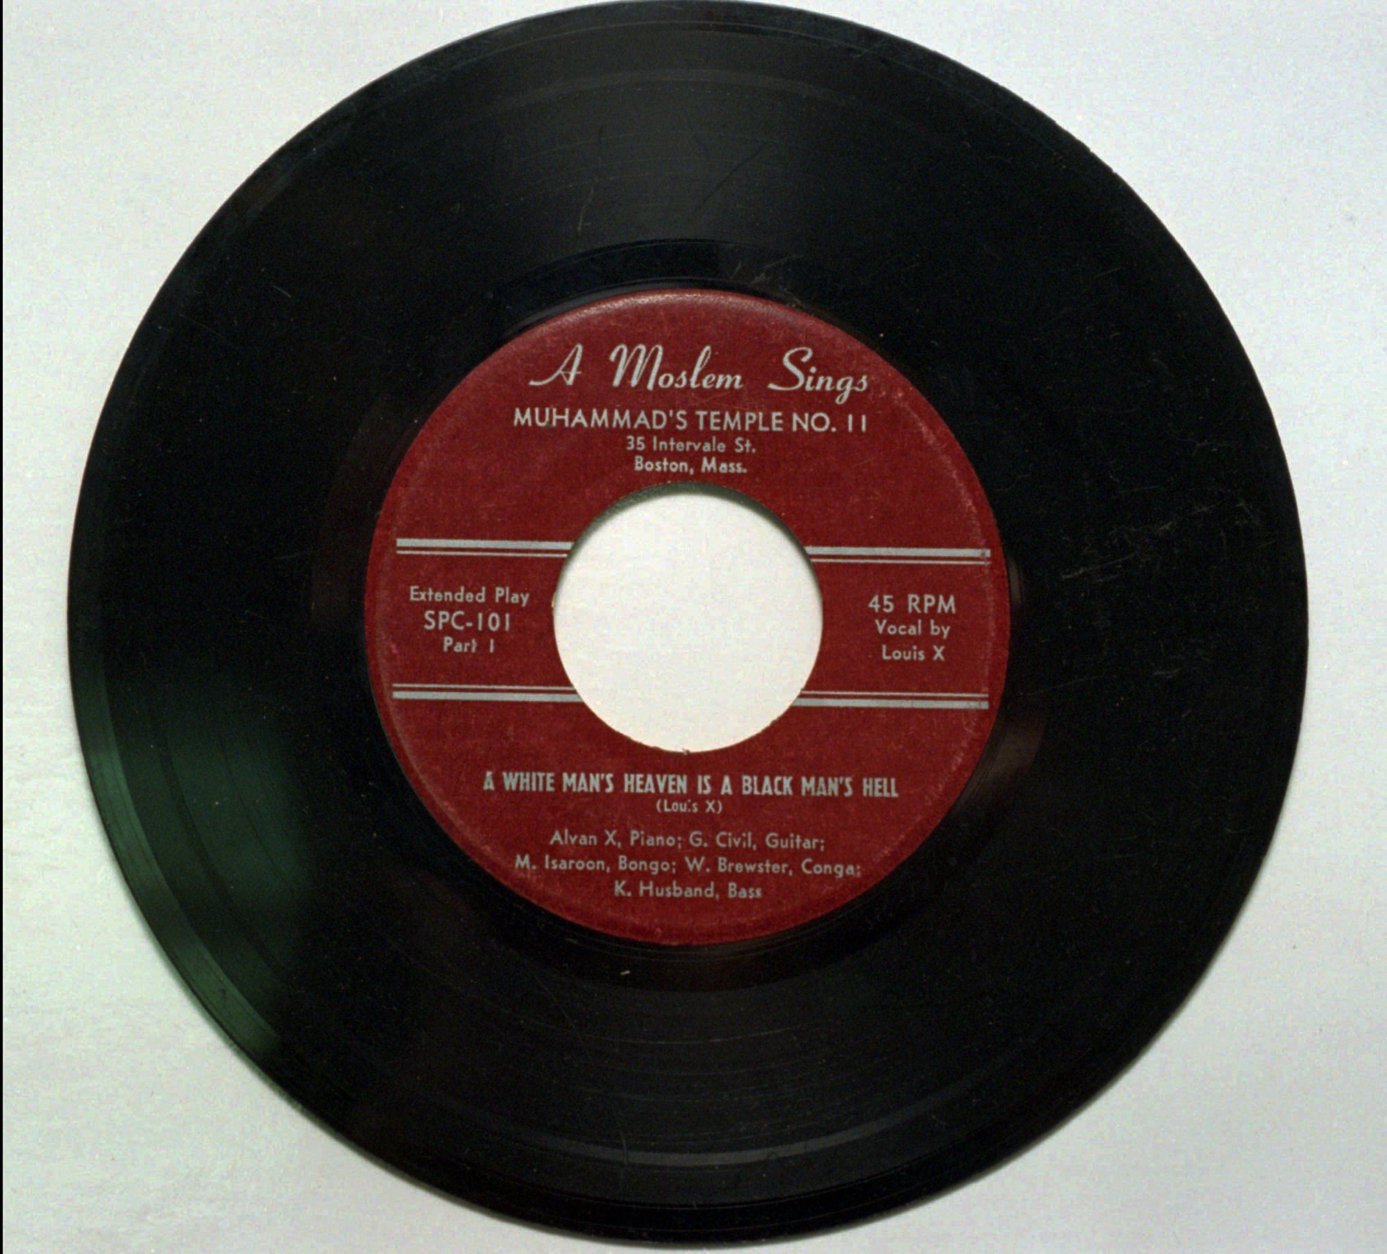 This 45 rpm record from Skippy White's record shop in Cambridge, Mass., was made by the Louis X, now better known as Louis Farrrakhan, leader of the Nation of Islam.  The song is titled "A White Man's Heaven is a Black Man's Hell." (AP Photo)